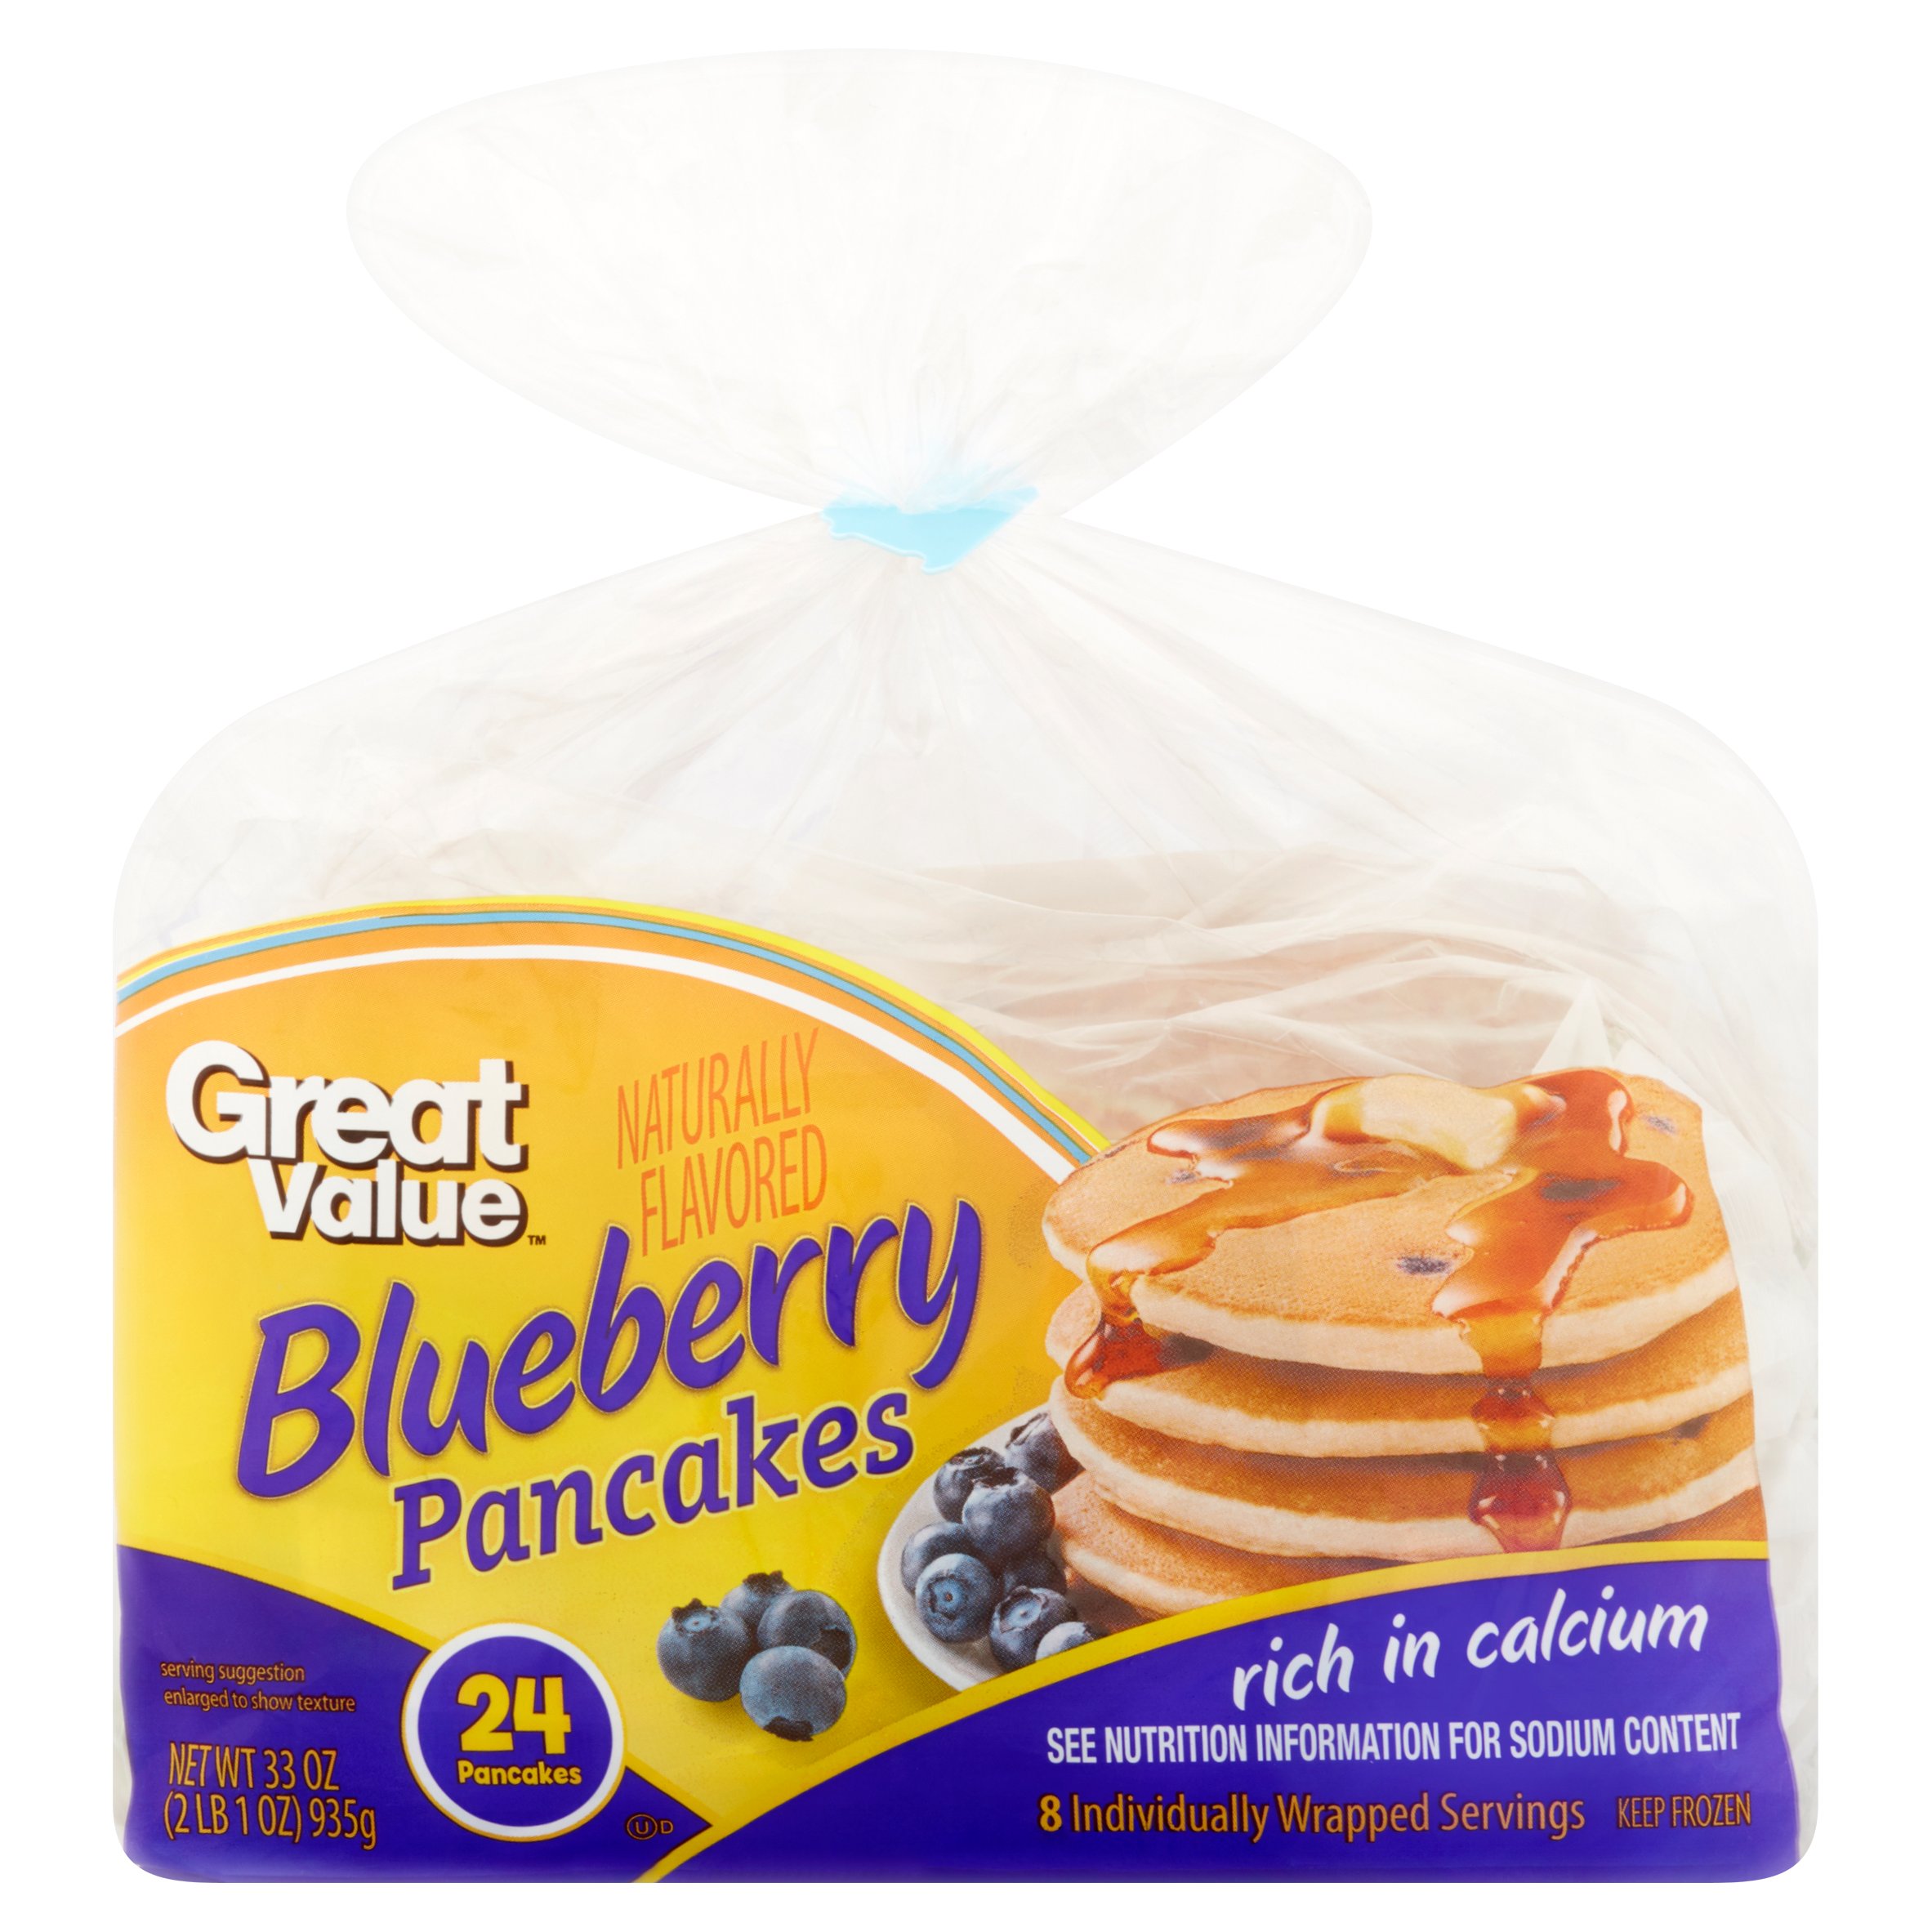 Great Value Blueberry Pancakes, 24 Count, 33 Oz Image